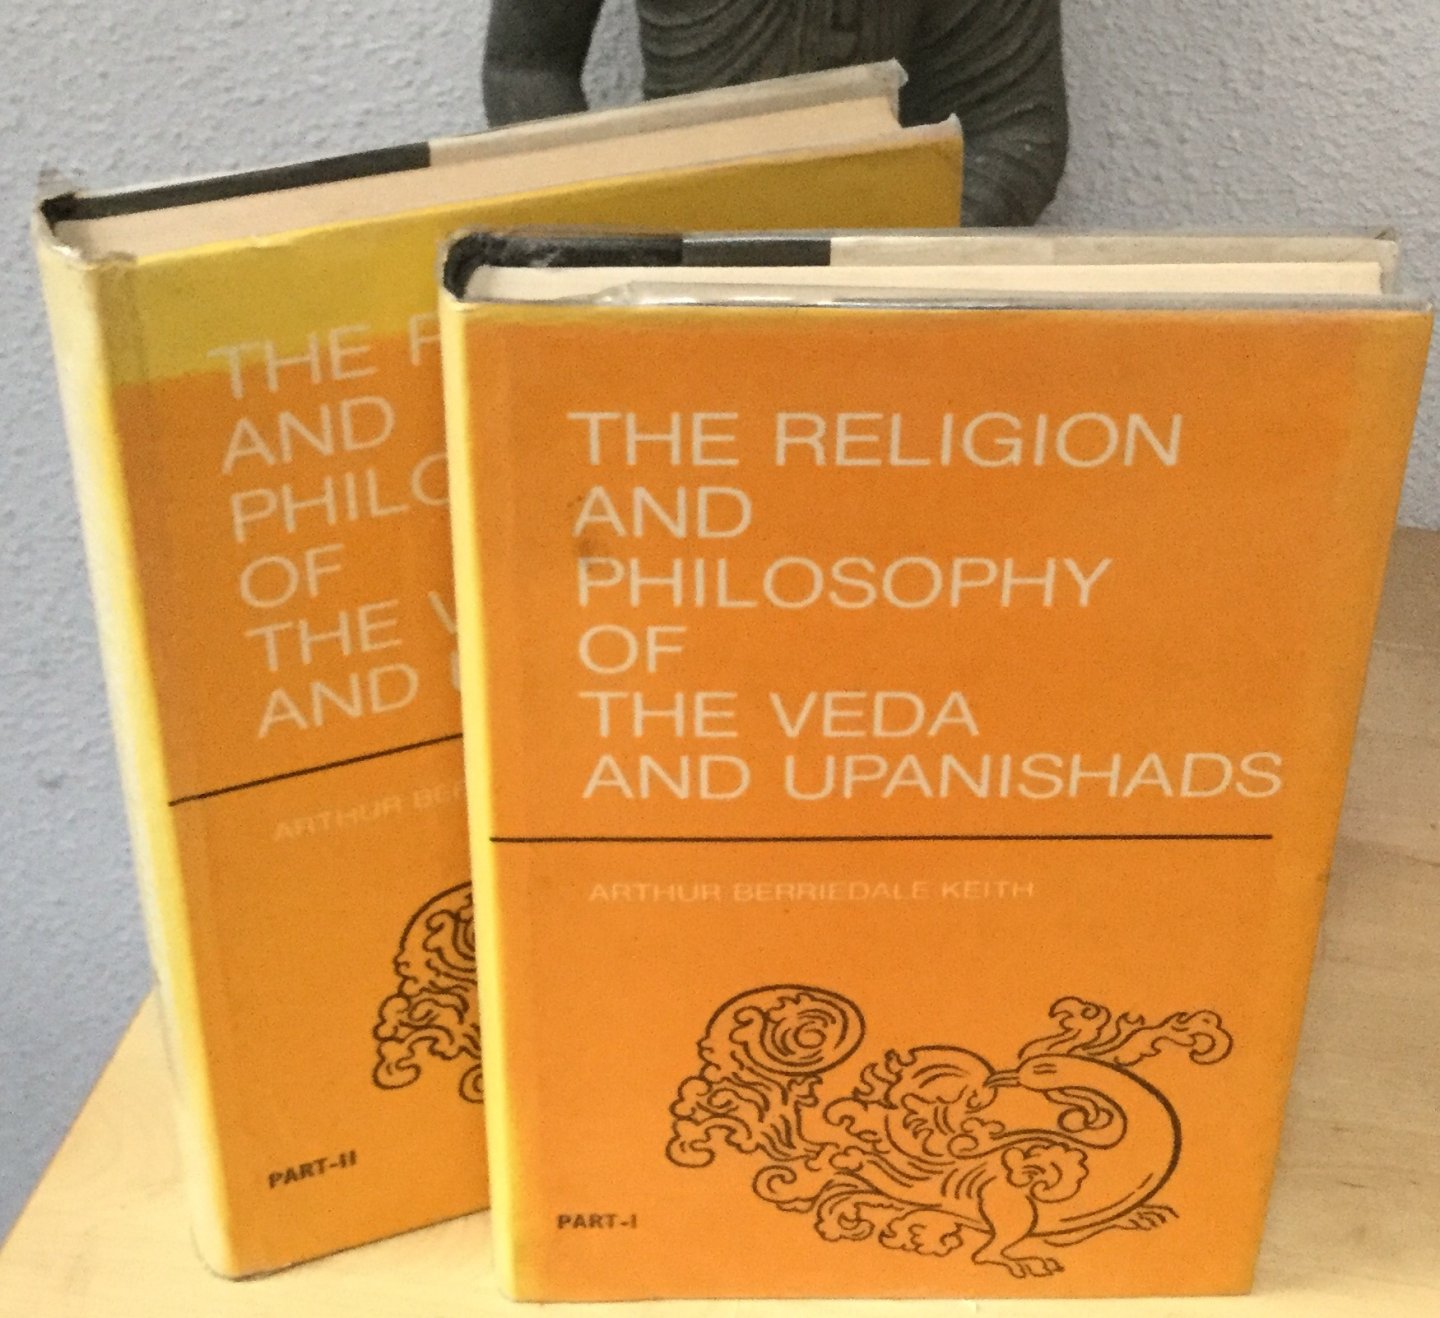 Keith, Arthur Berriedale - The religion and philosophy of the Veda and Upanishads, part I and II